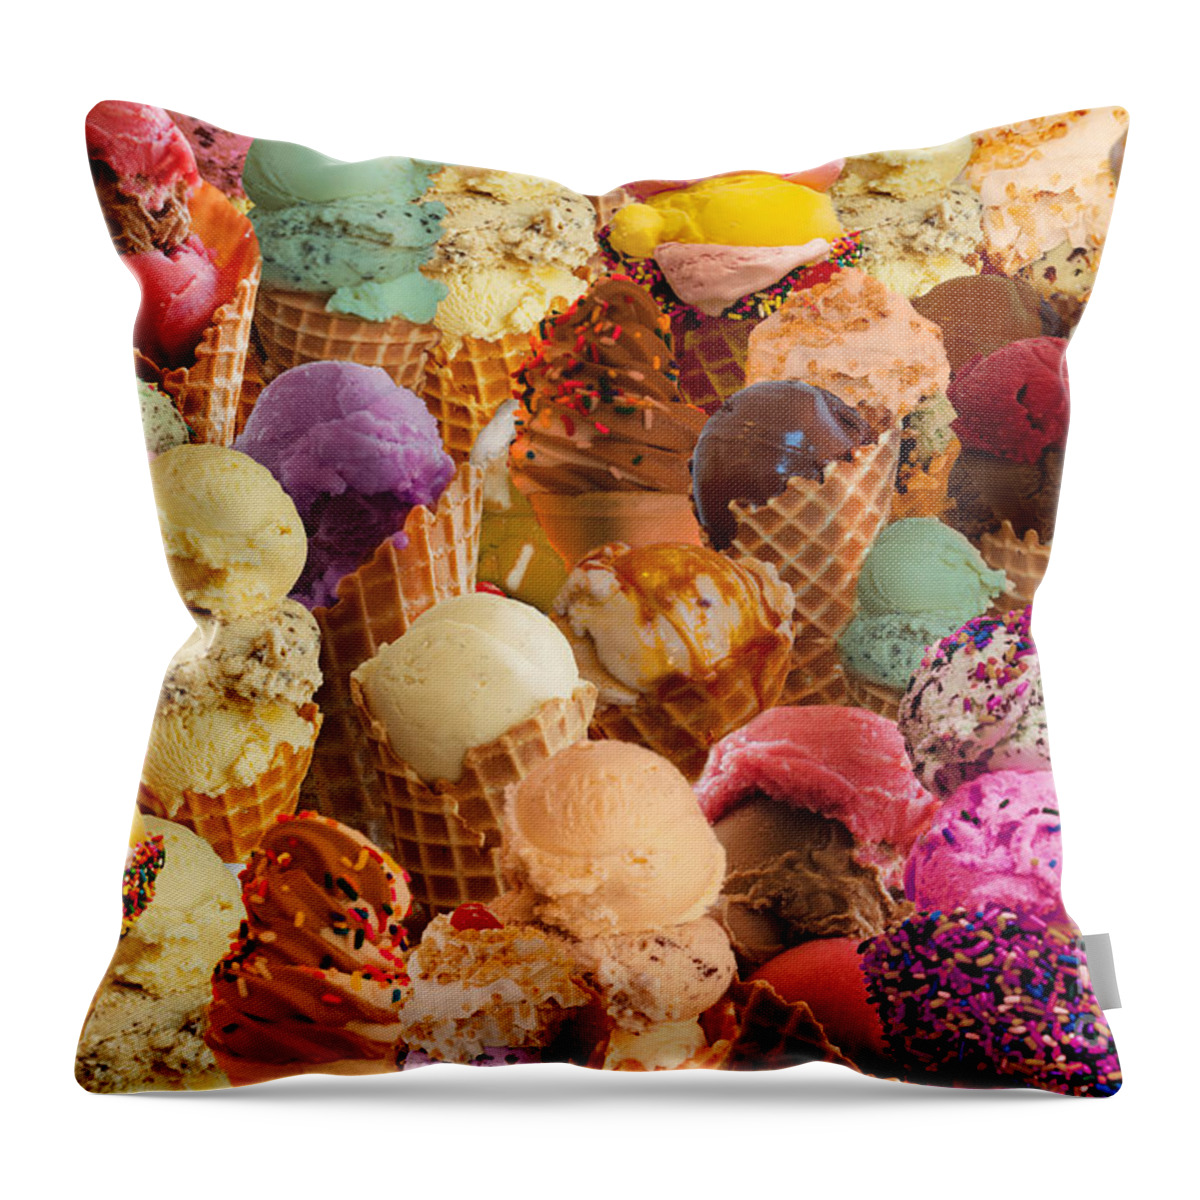 Abstract Throw Pillow featuring the digital art Ice Cream Crazy by MGL Meiklejohn Graphics Licensing